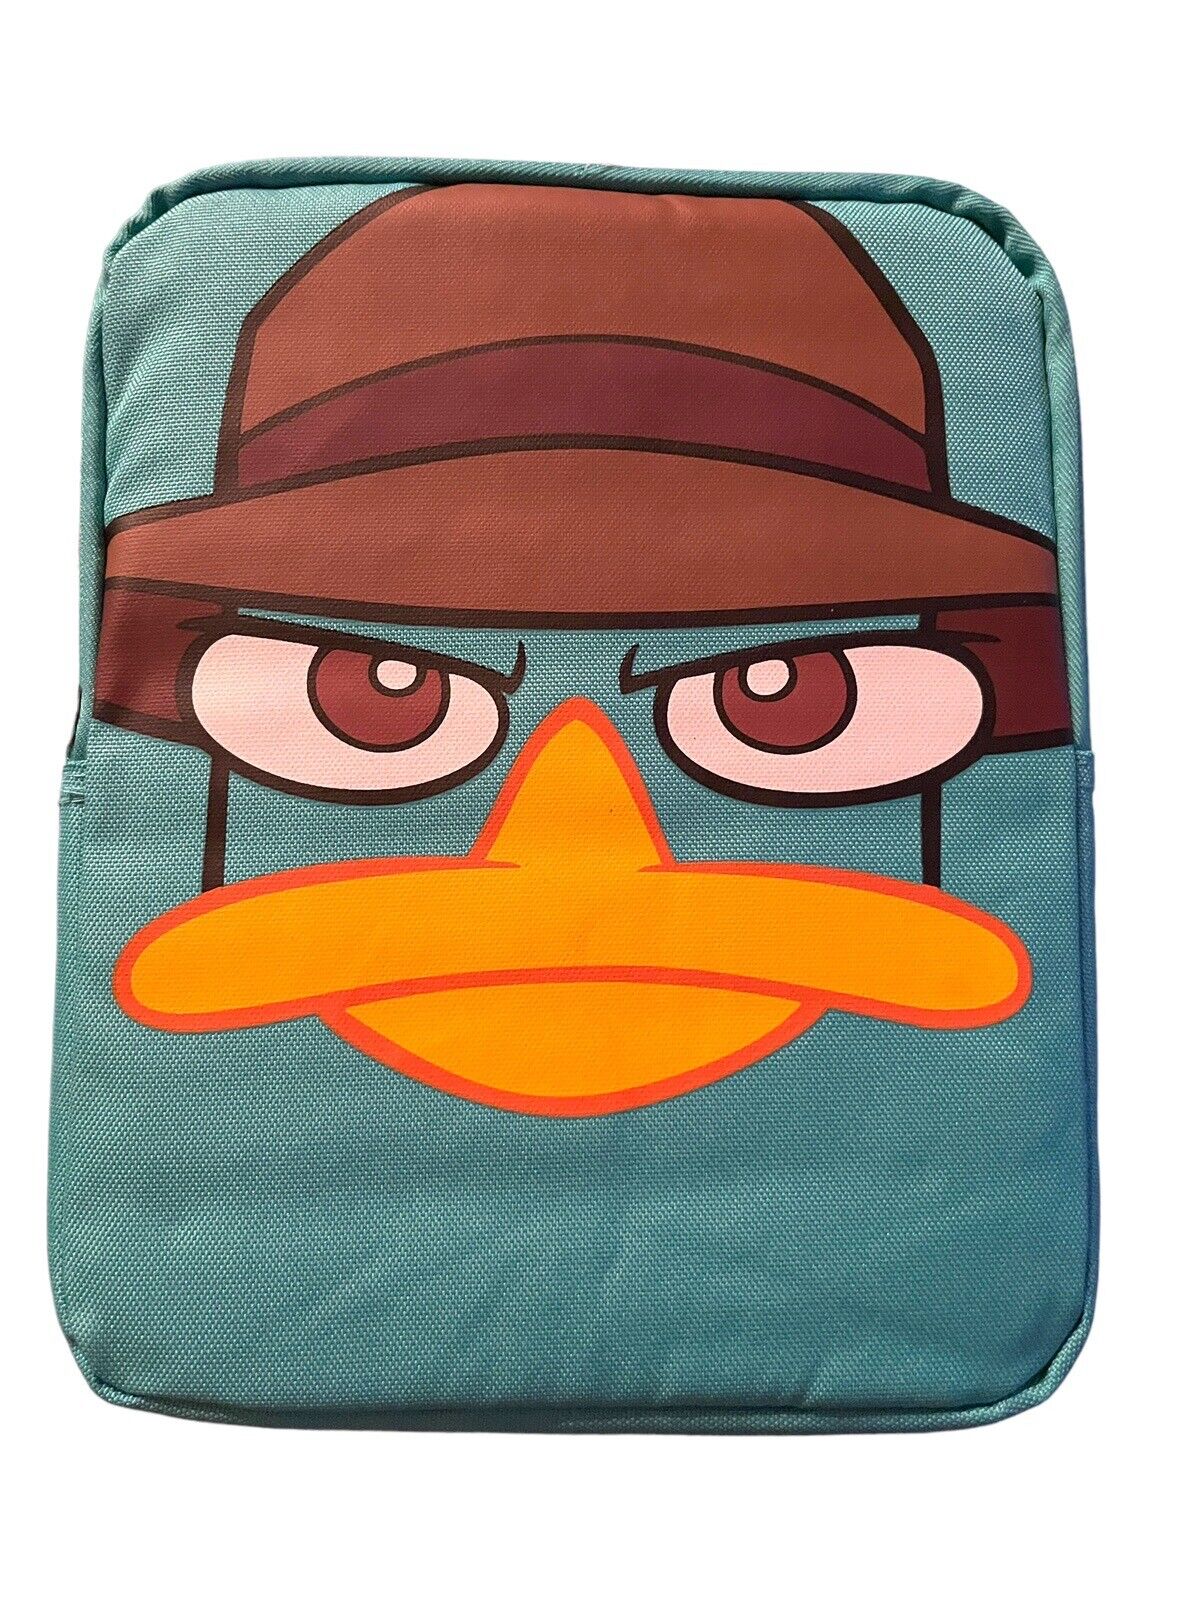 Disney Phineas And Ferb Perry The Platypus Soft Tablet Case Green 10x8 Inches *